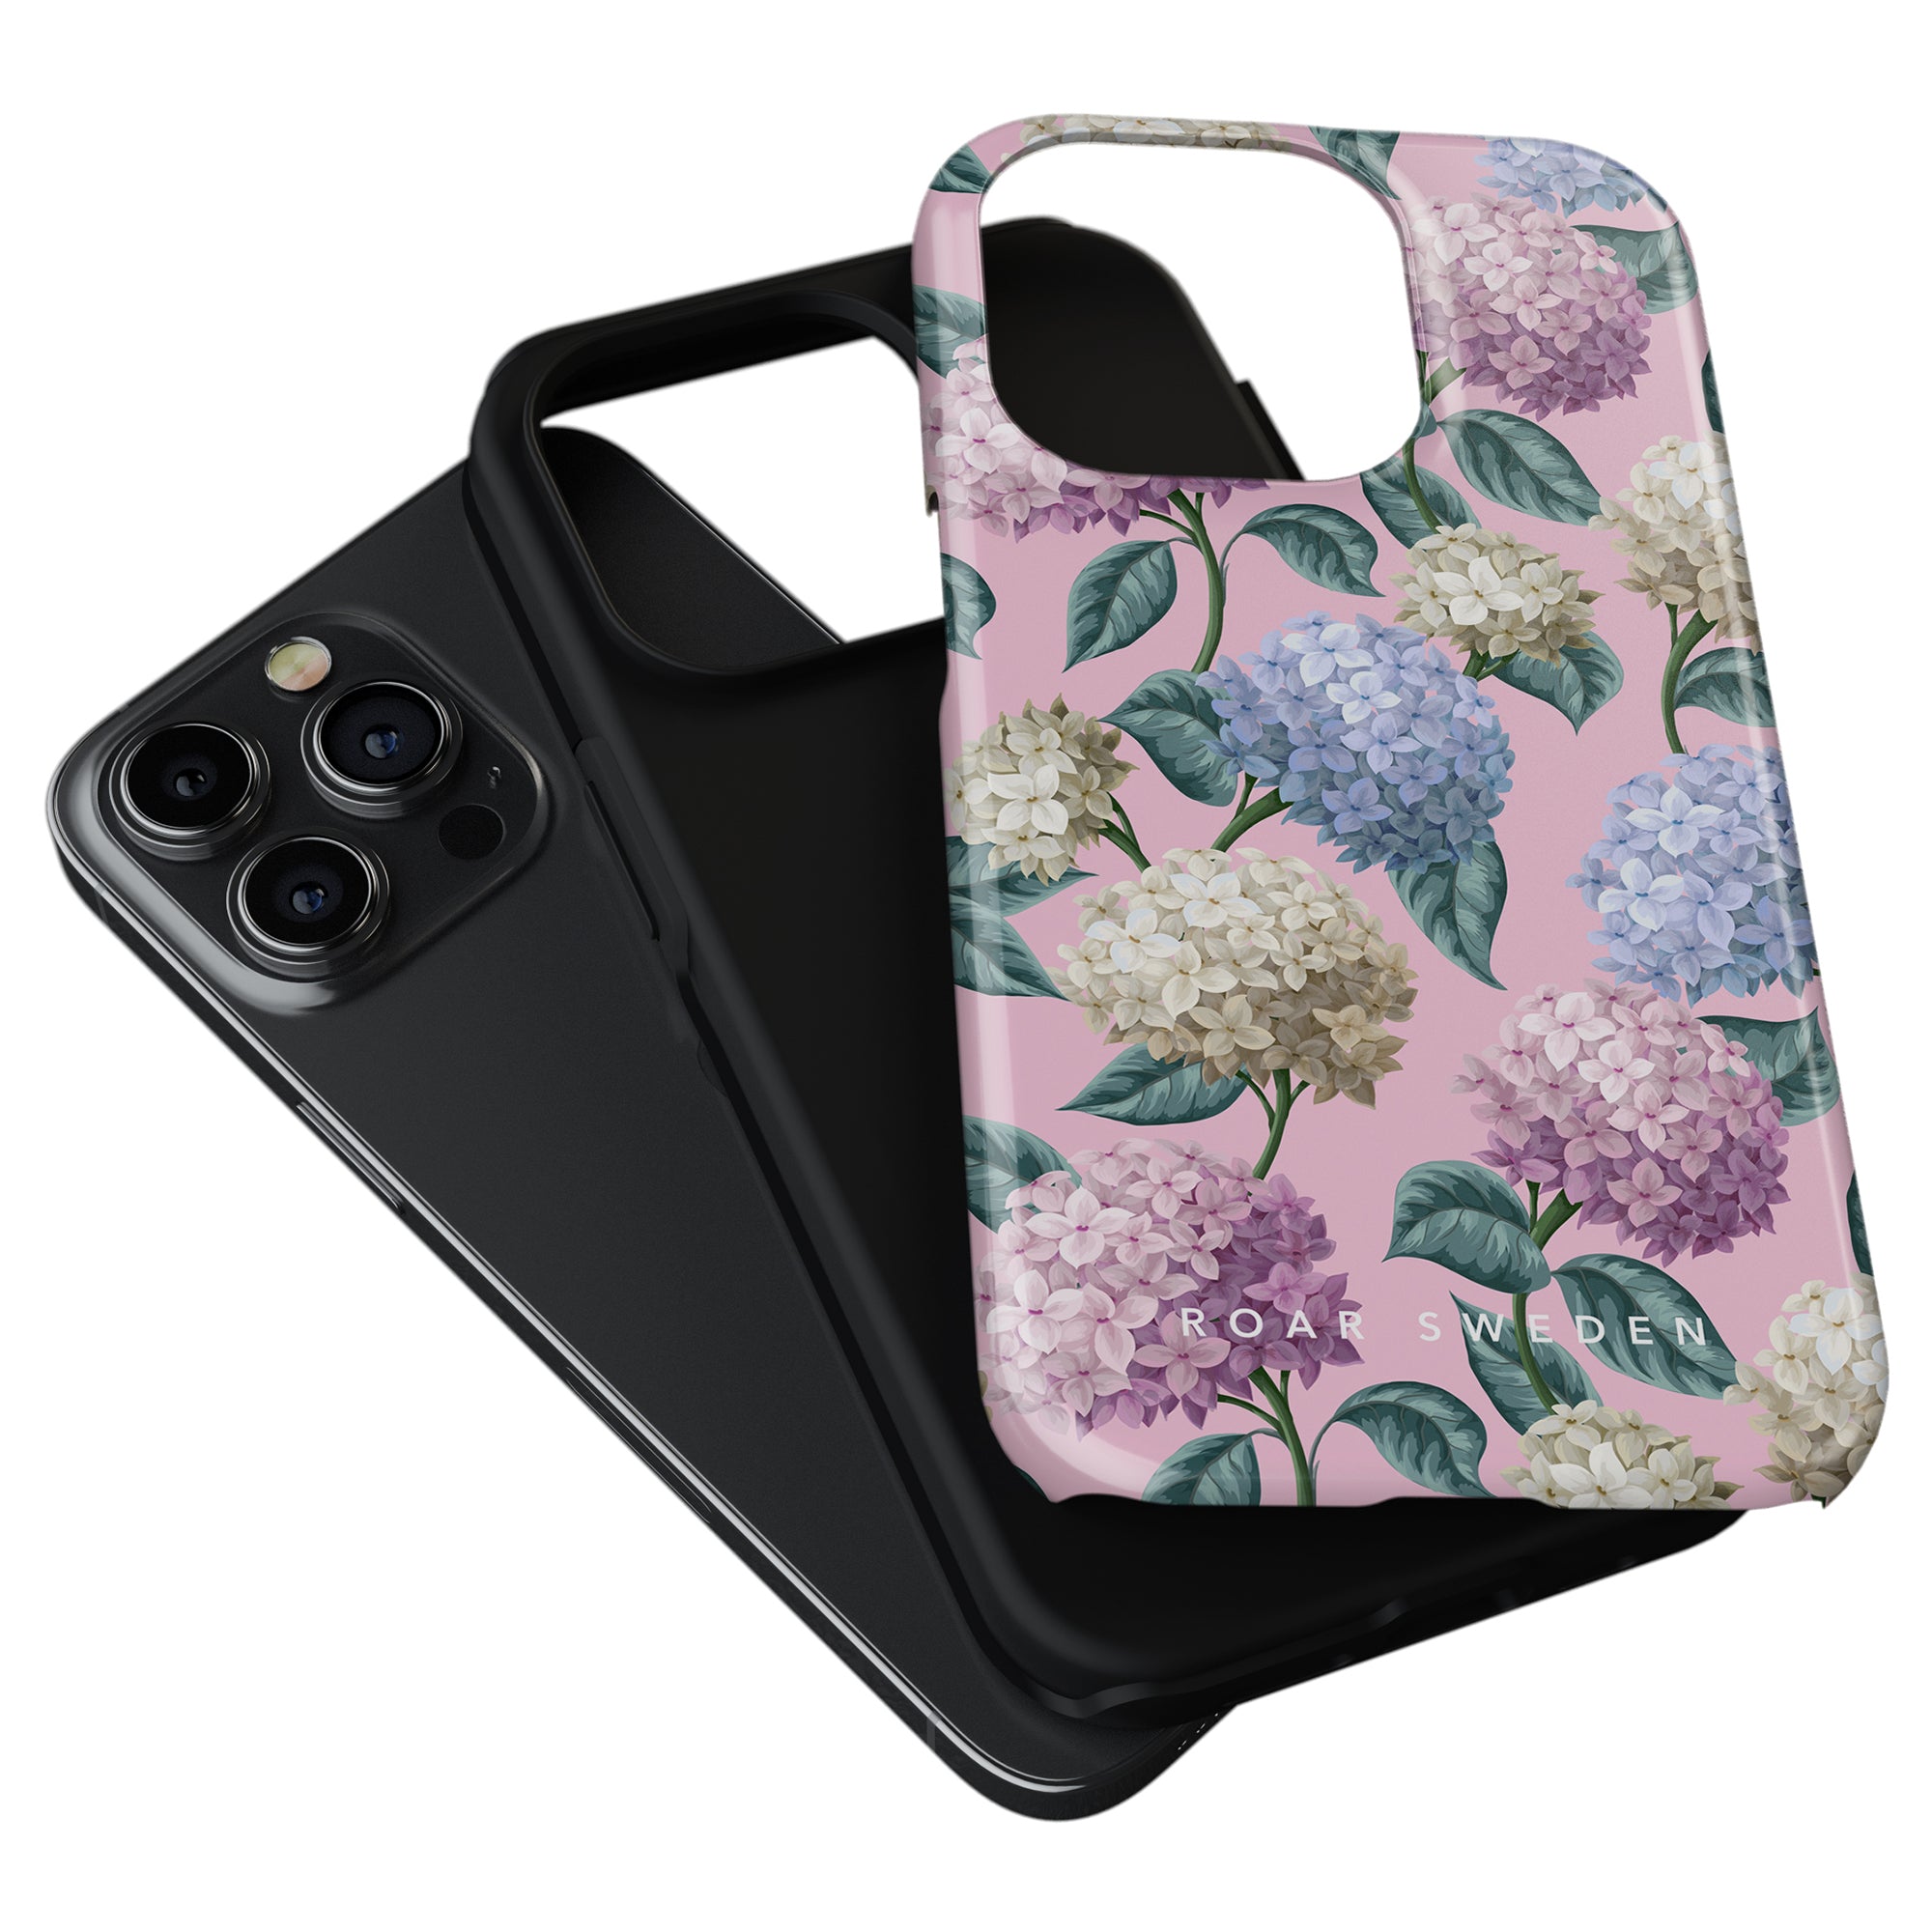 Two phone cases are shown; one offers sleek black smartphone protection, and the other is part of the Summer Collection, featuring a pink background with Hydrangea - Tough Case designs. The latter has the text "ROAR SWEDEN" at the bottom. An iPhone partially sits inside one of the cases.